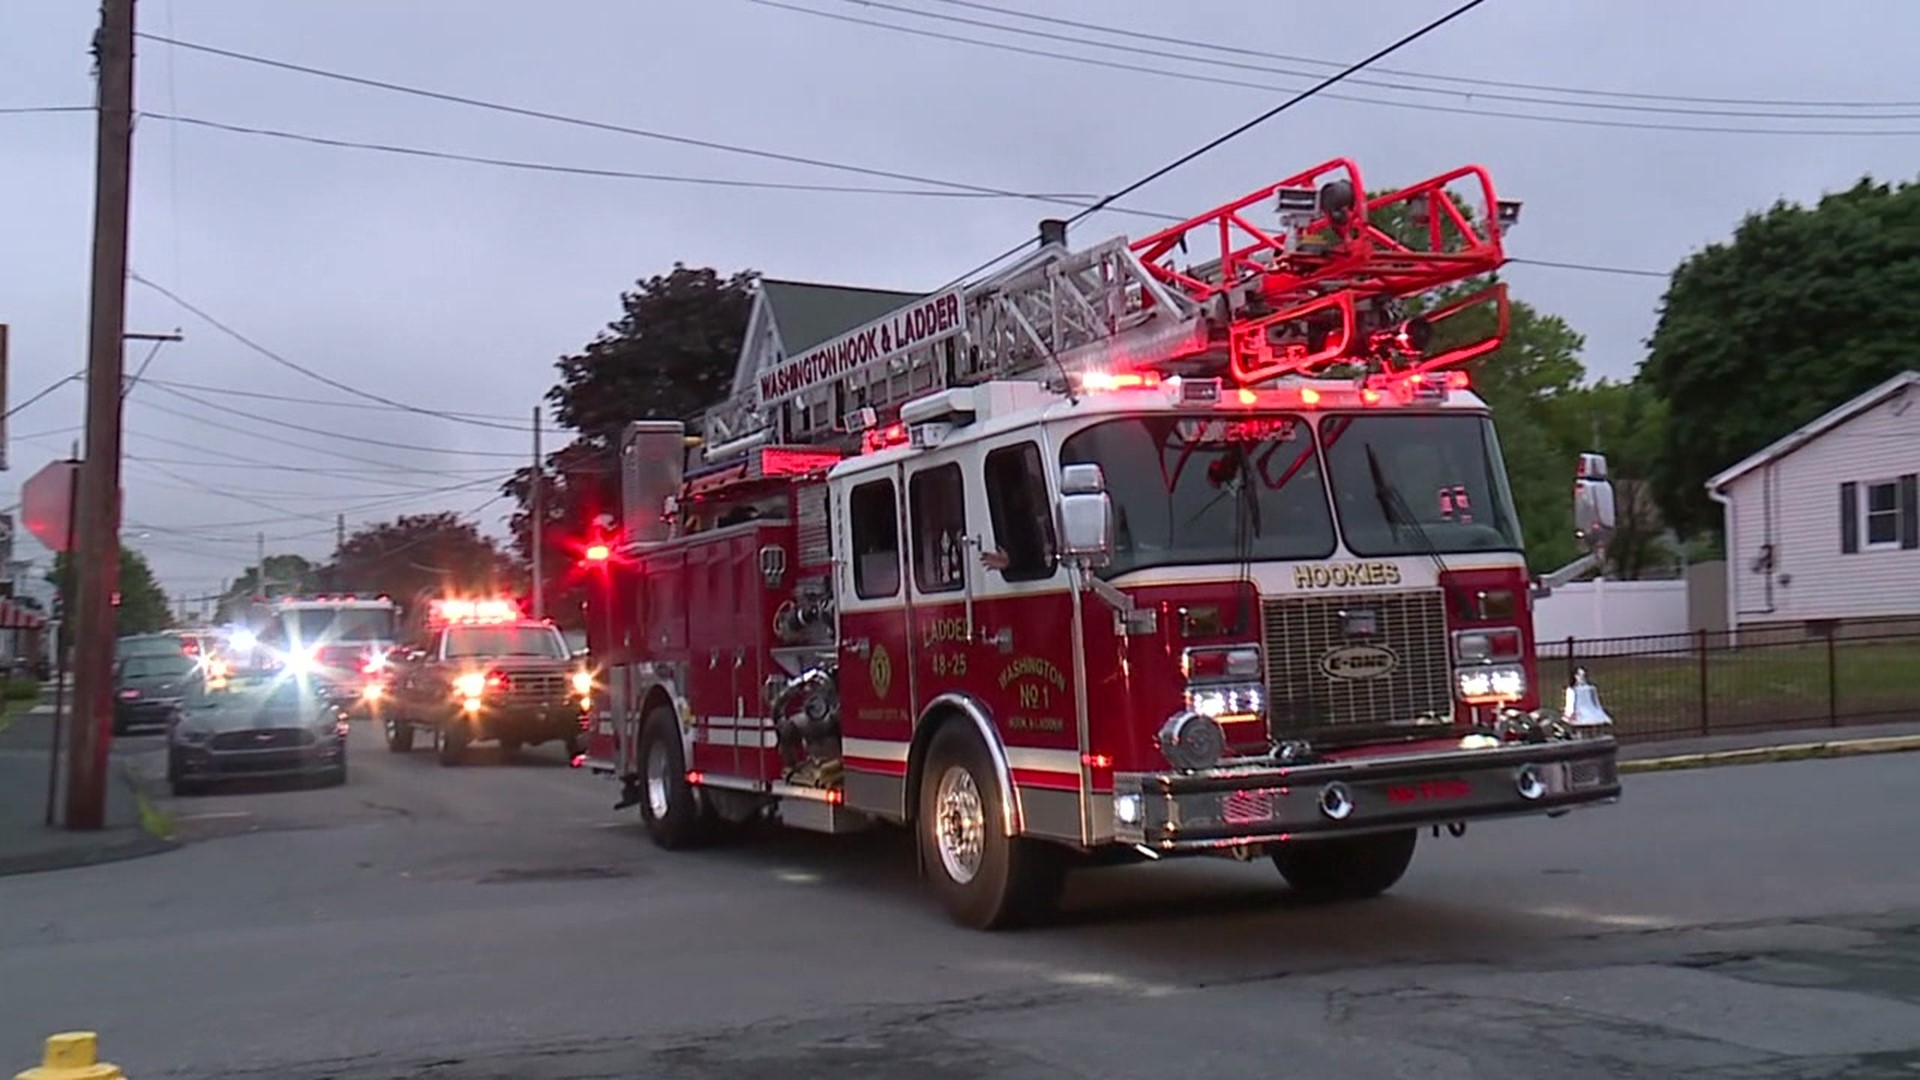 Despite rising gas prices, a fire company in Schuylkill County is preparing to kick off the holiday weekend with its annual fire truck parade and block party.